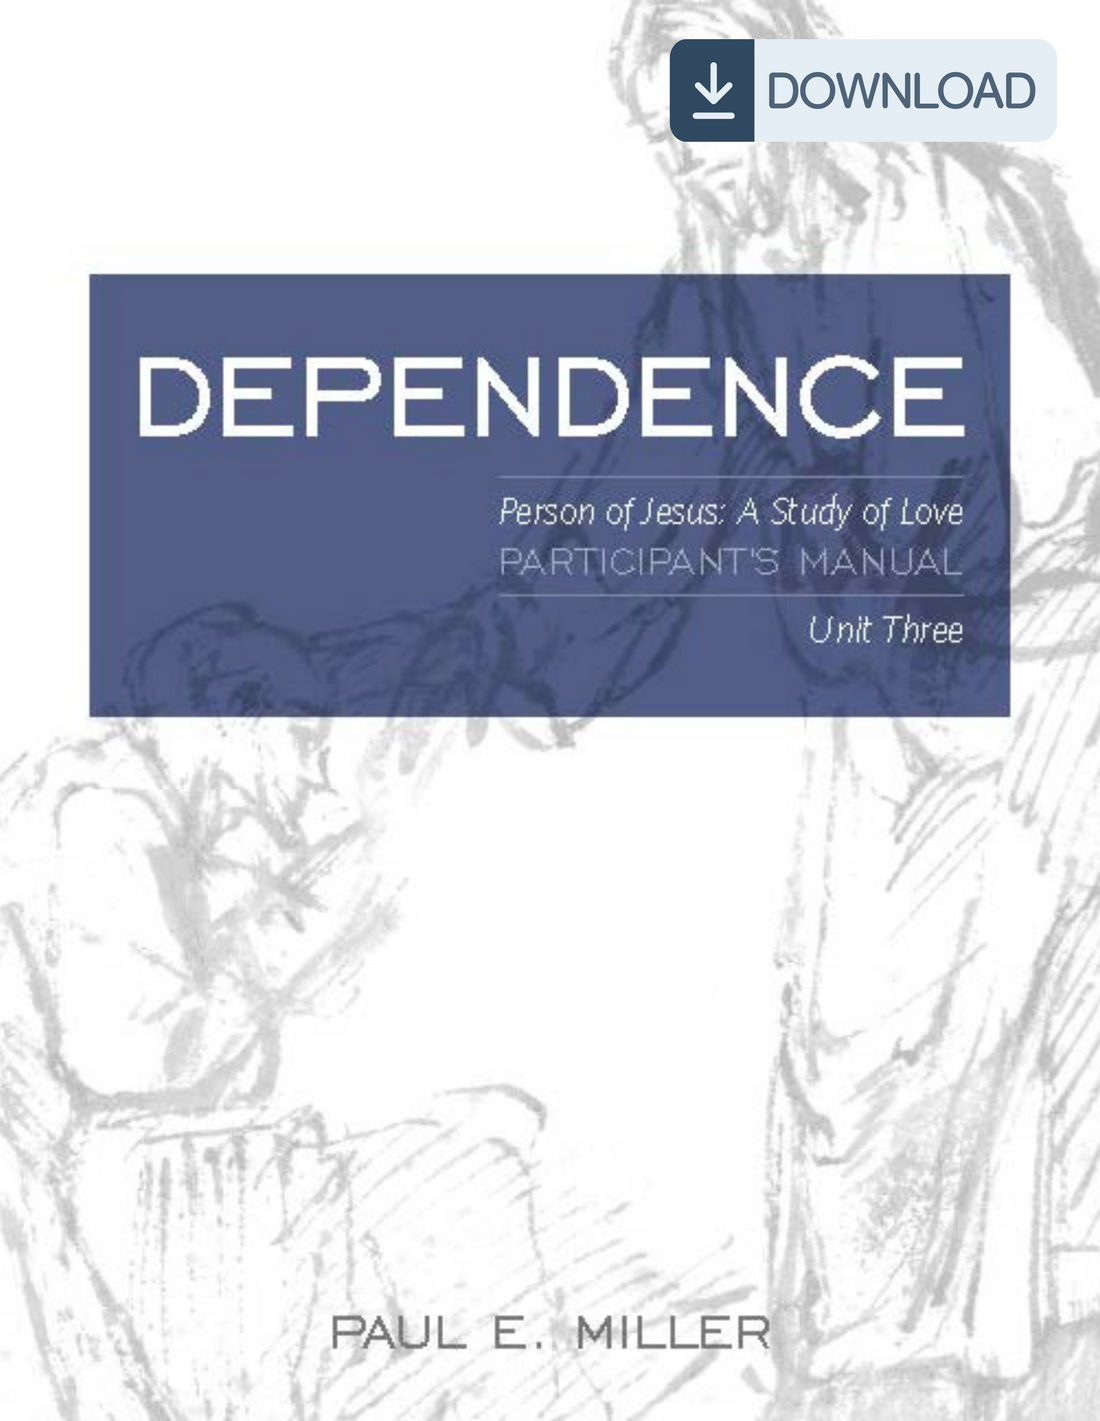 The Person of Jesus, Unit 3: Dependence Participant&